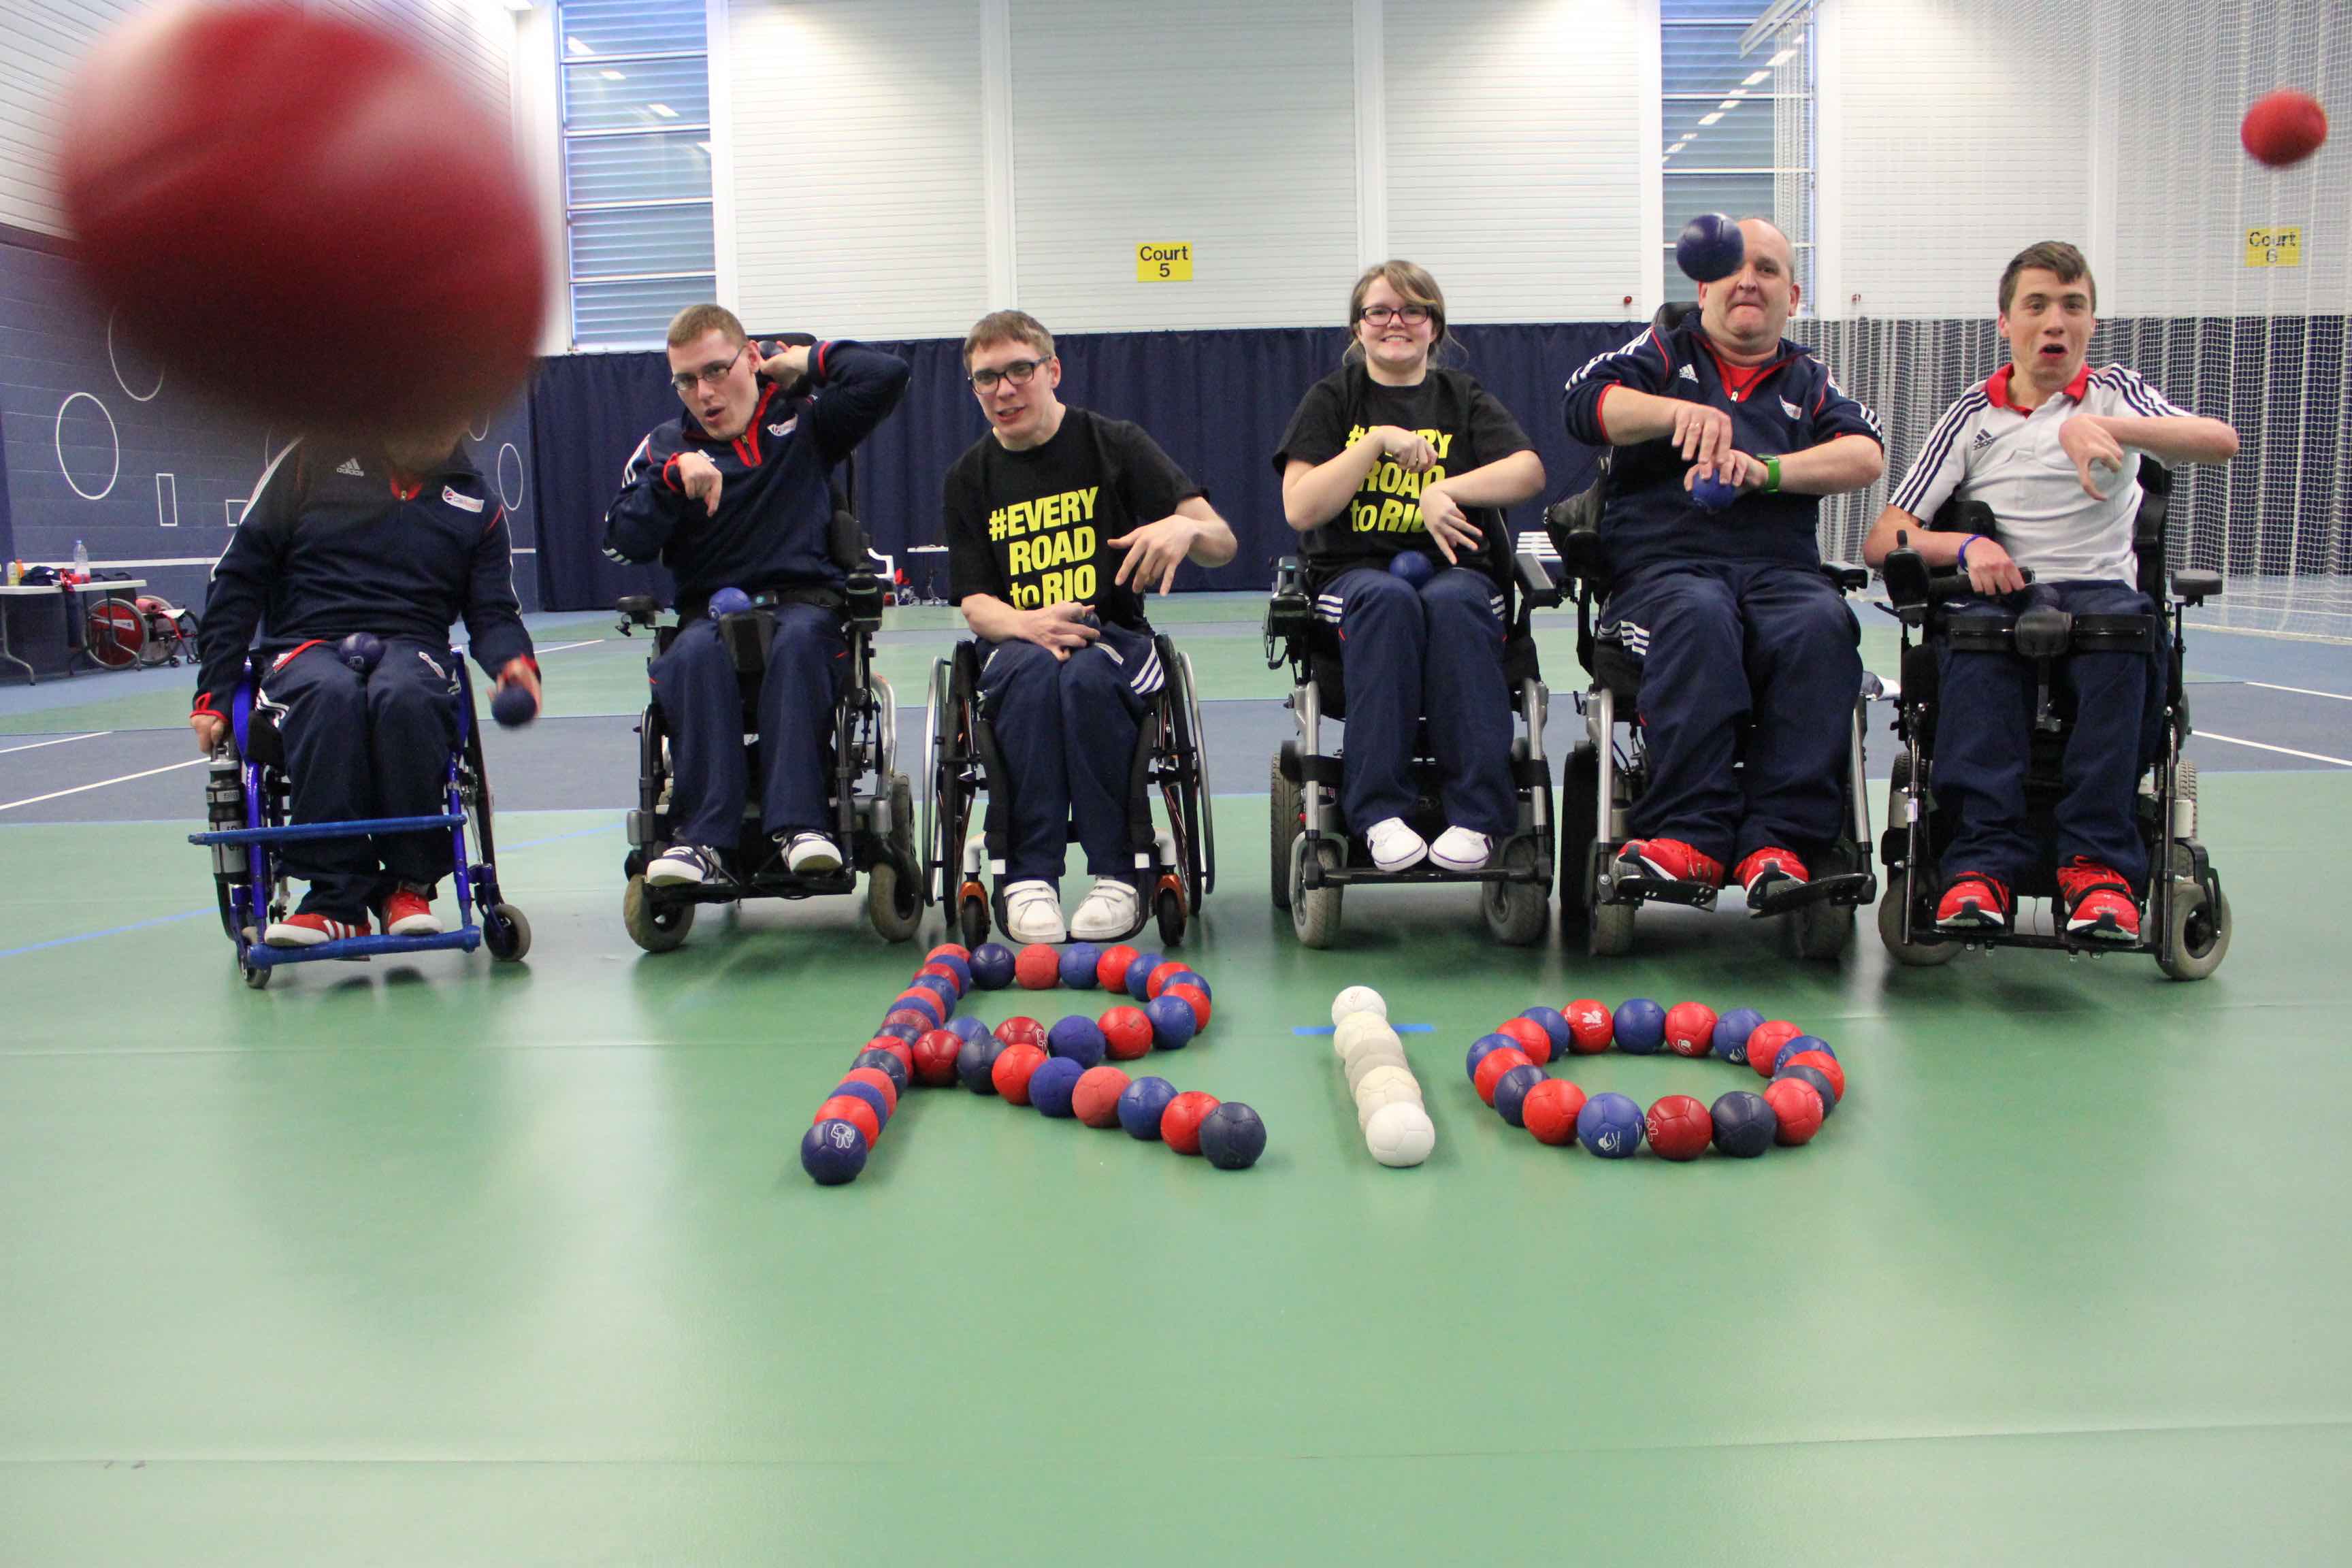 British BC1/BC2 team Martin Davis, Josh Rowe, Will Hipwell, Claire Taggart, Nigel Murray and David Smith will be hoping to qualify for Rio 2016 on home turf ©GB Boccia